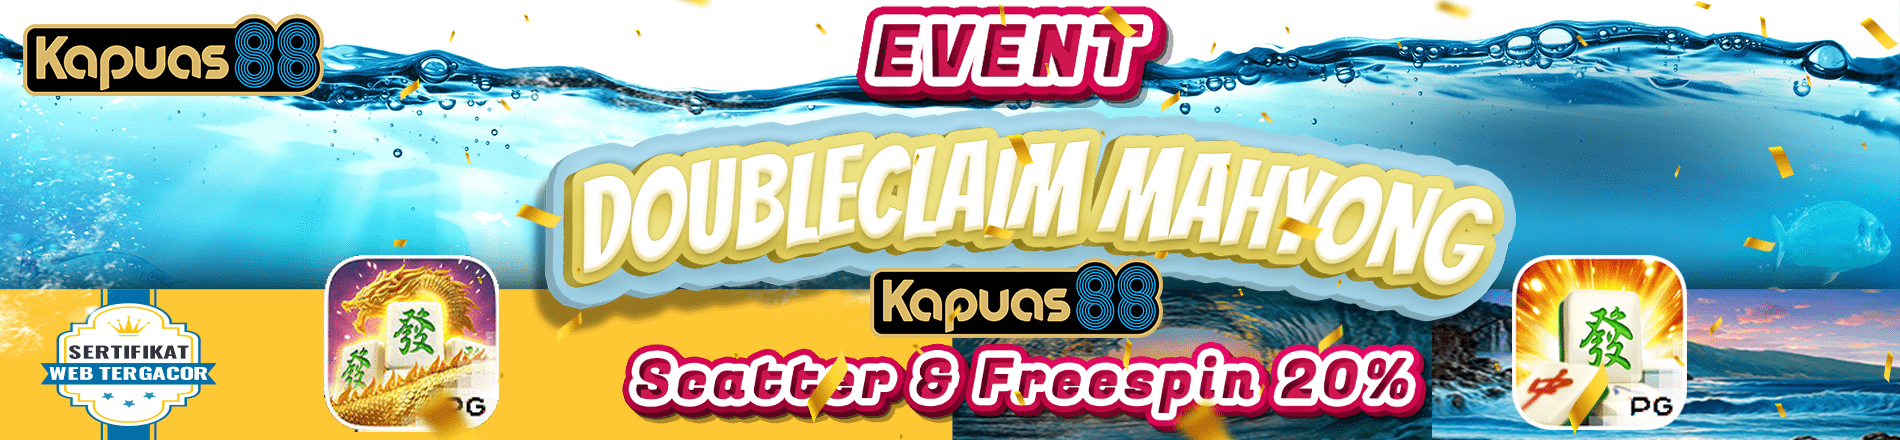 EVENT DOUBLECLAIM MAHYONG SCATTER & FREESPIN 20% KAPUAS88